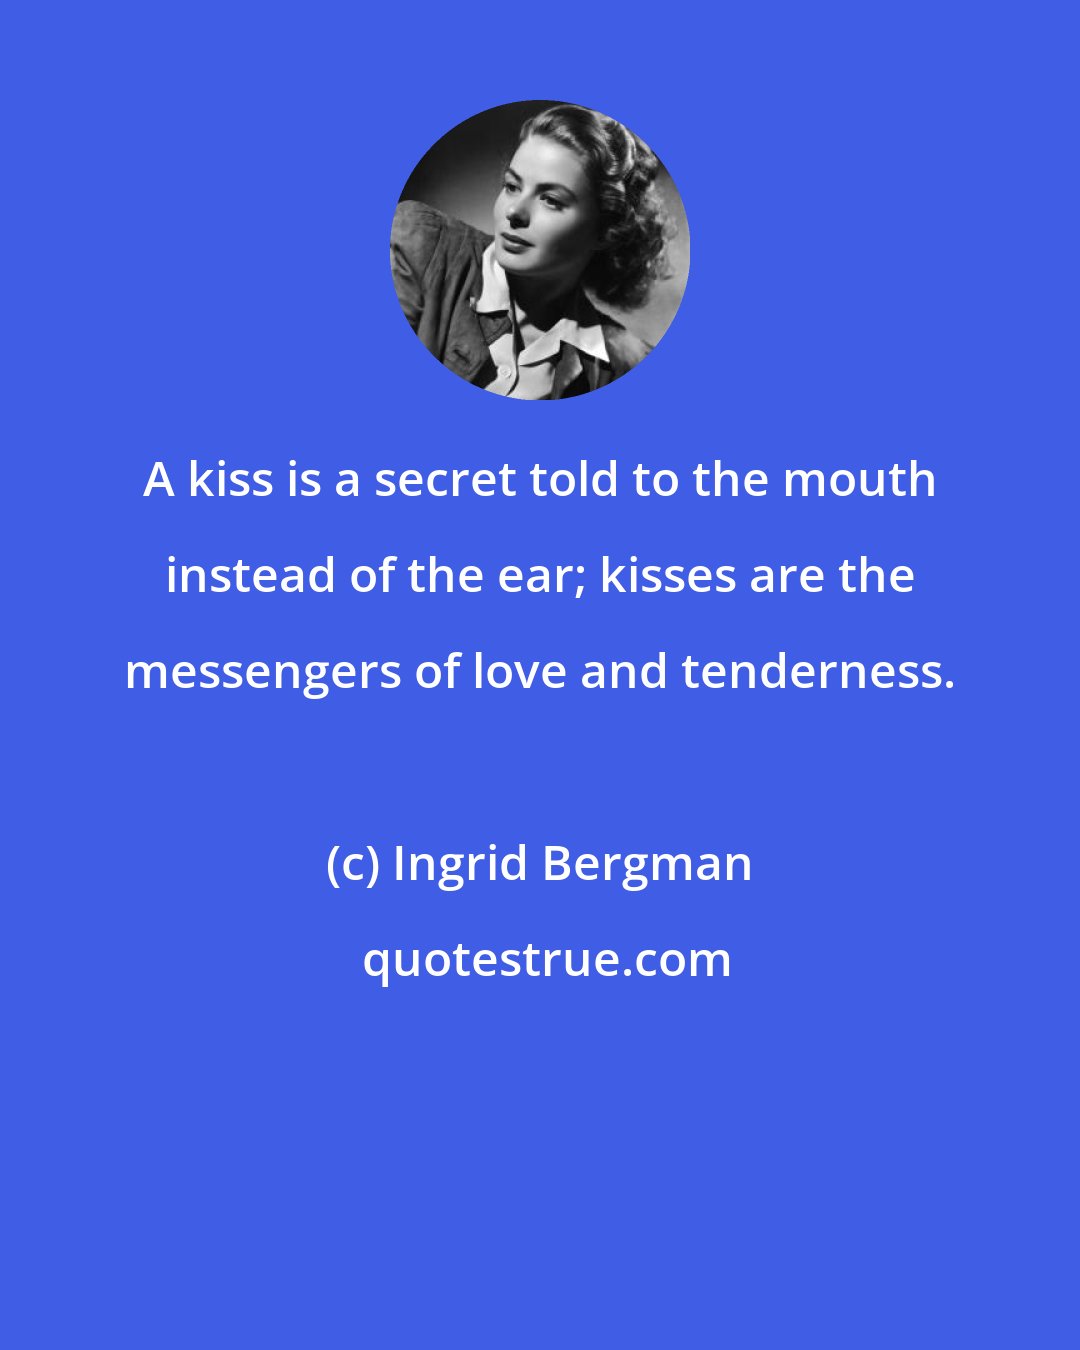 Ingrid Bergman: A kiss is a secret told to the mouth instead of the ear; kisses are the messengers of love and tenderness.